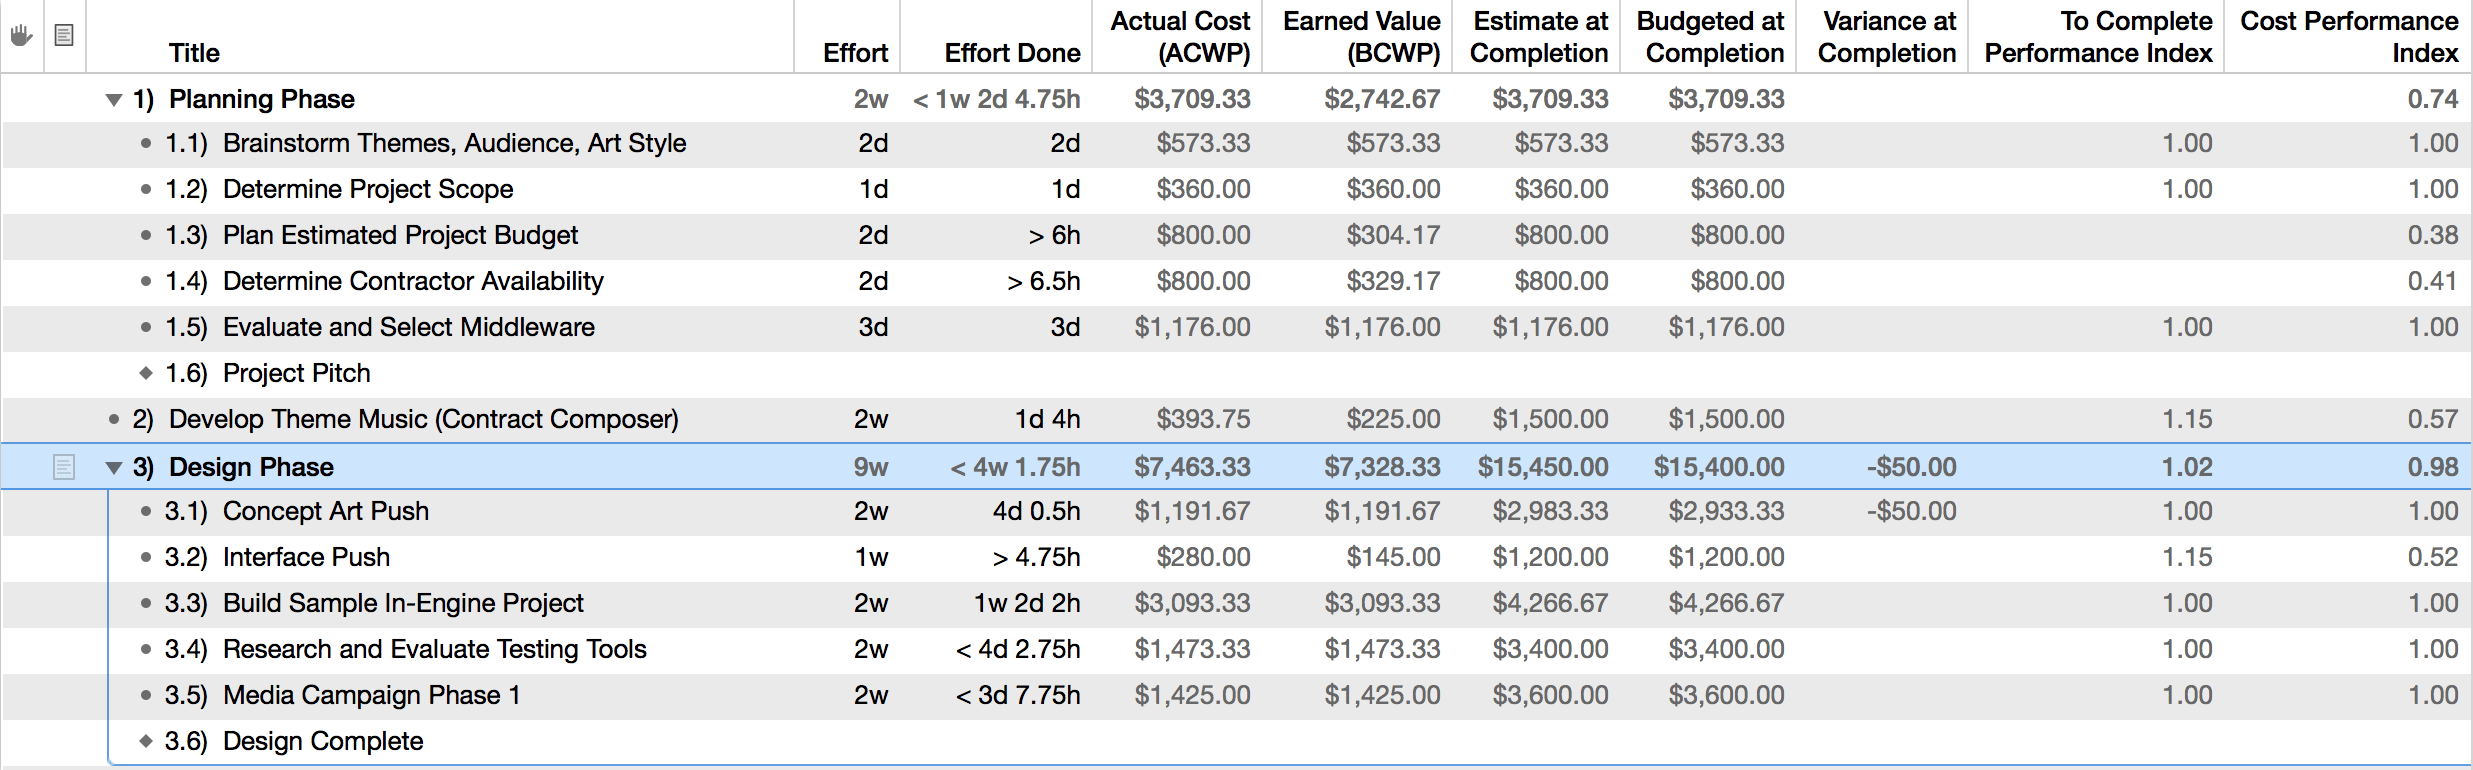 Earned Value Analysis columns related to task completion.